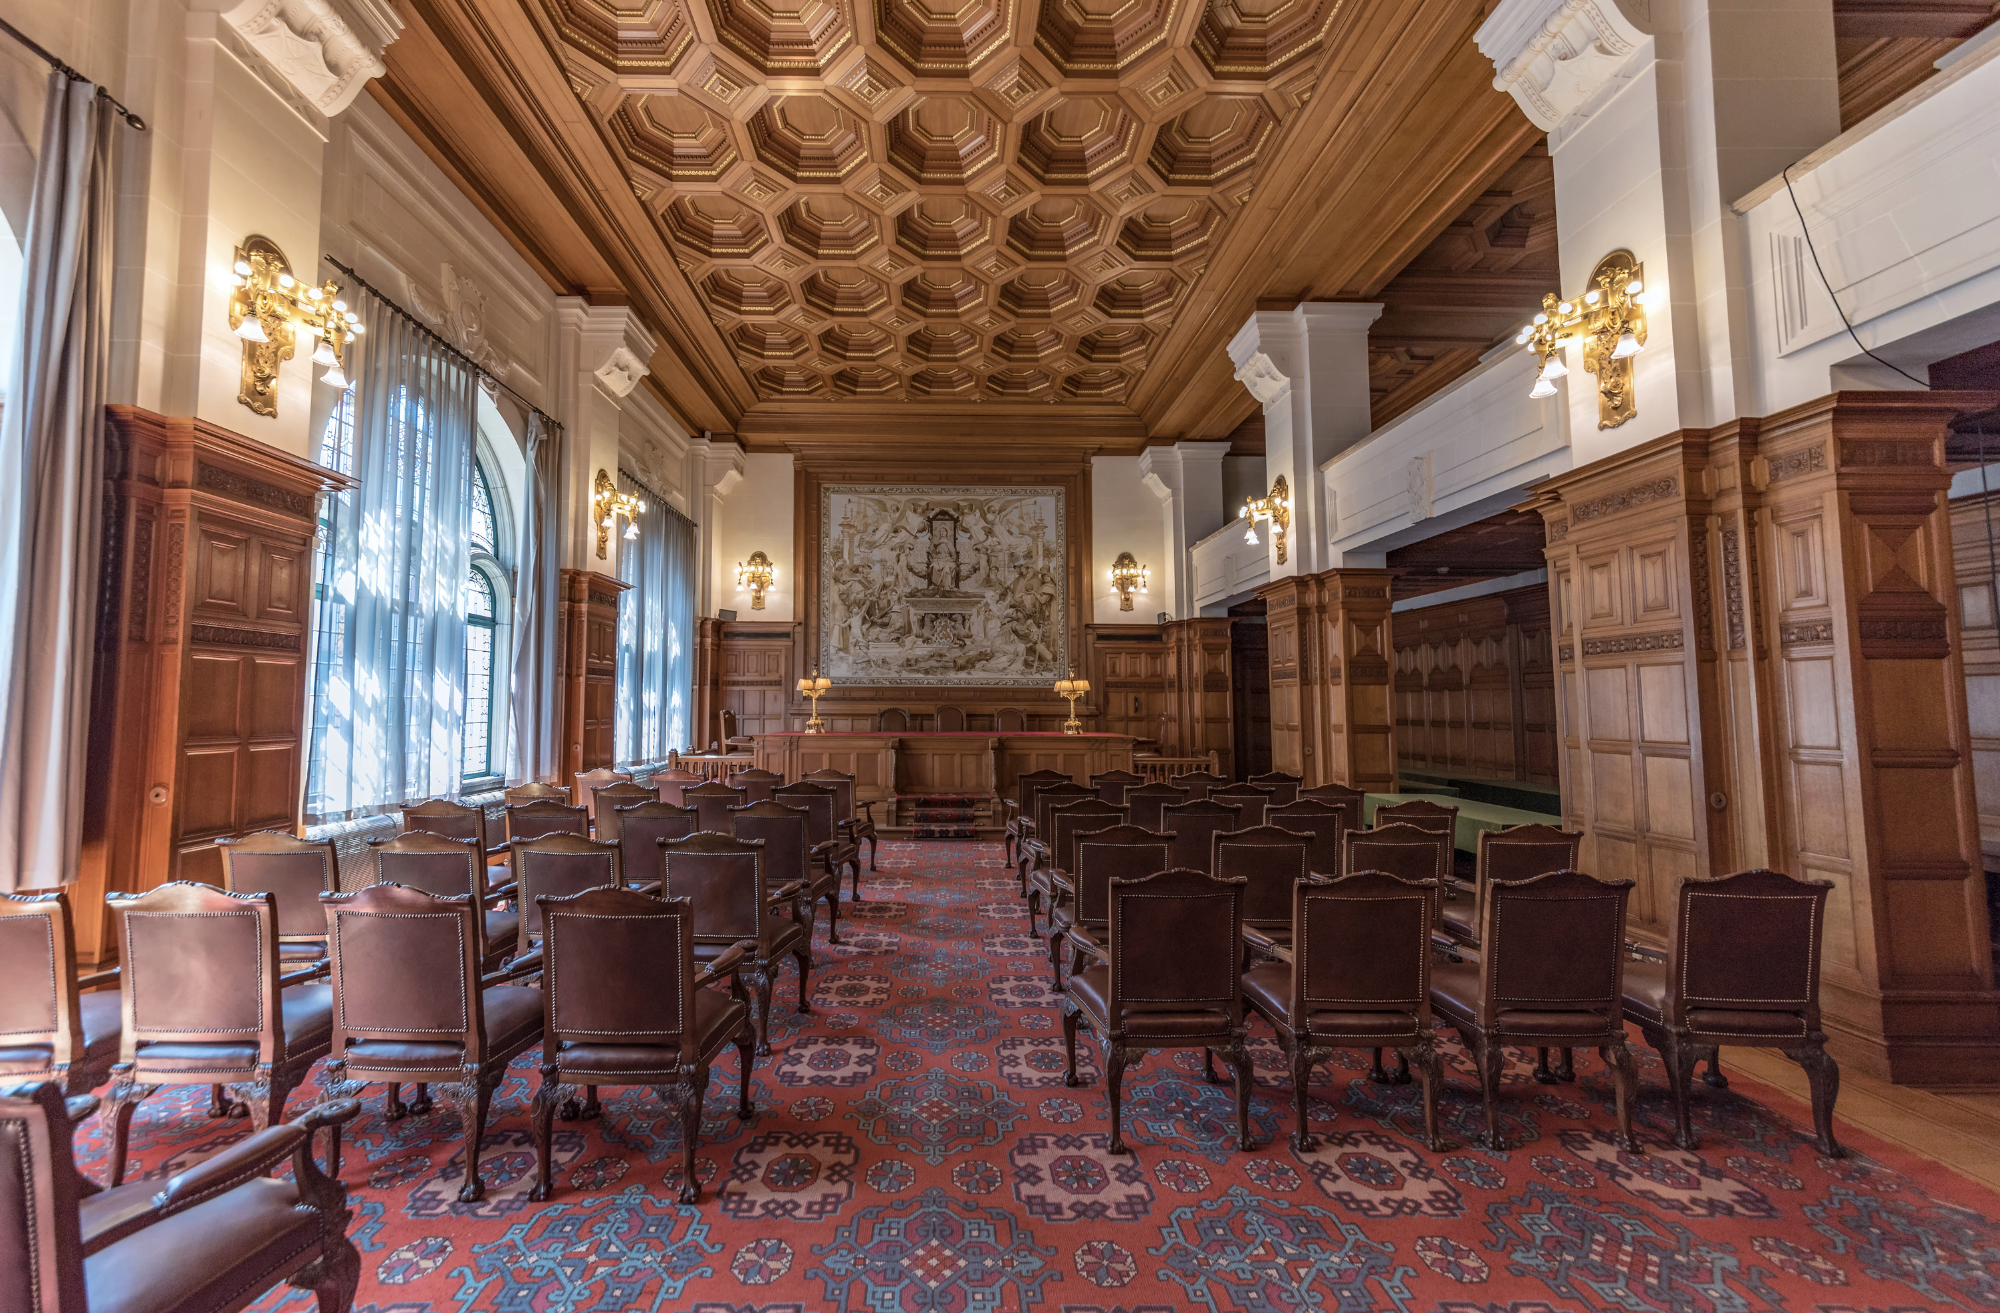 Courtroom of the Permanent Arbitration Court in the Peace Palace located in Den Haag, Netherlands.